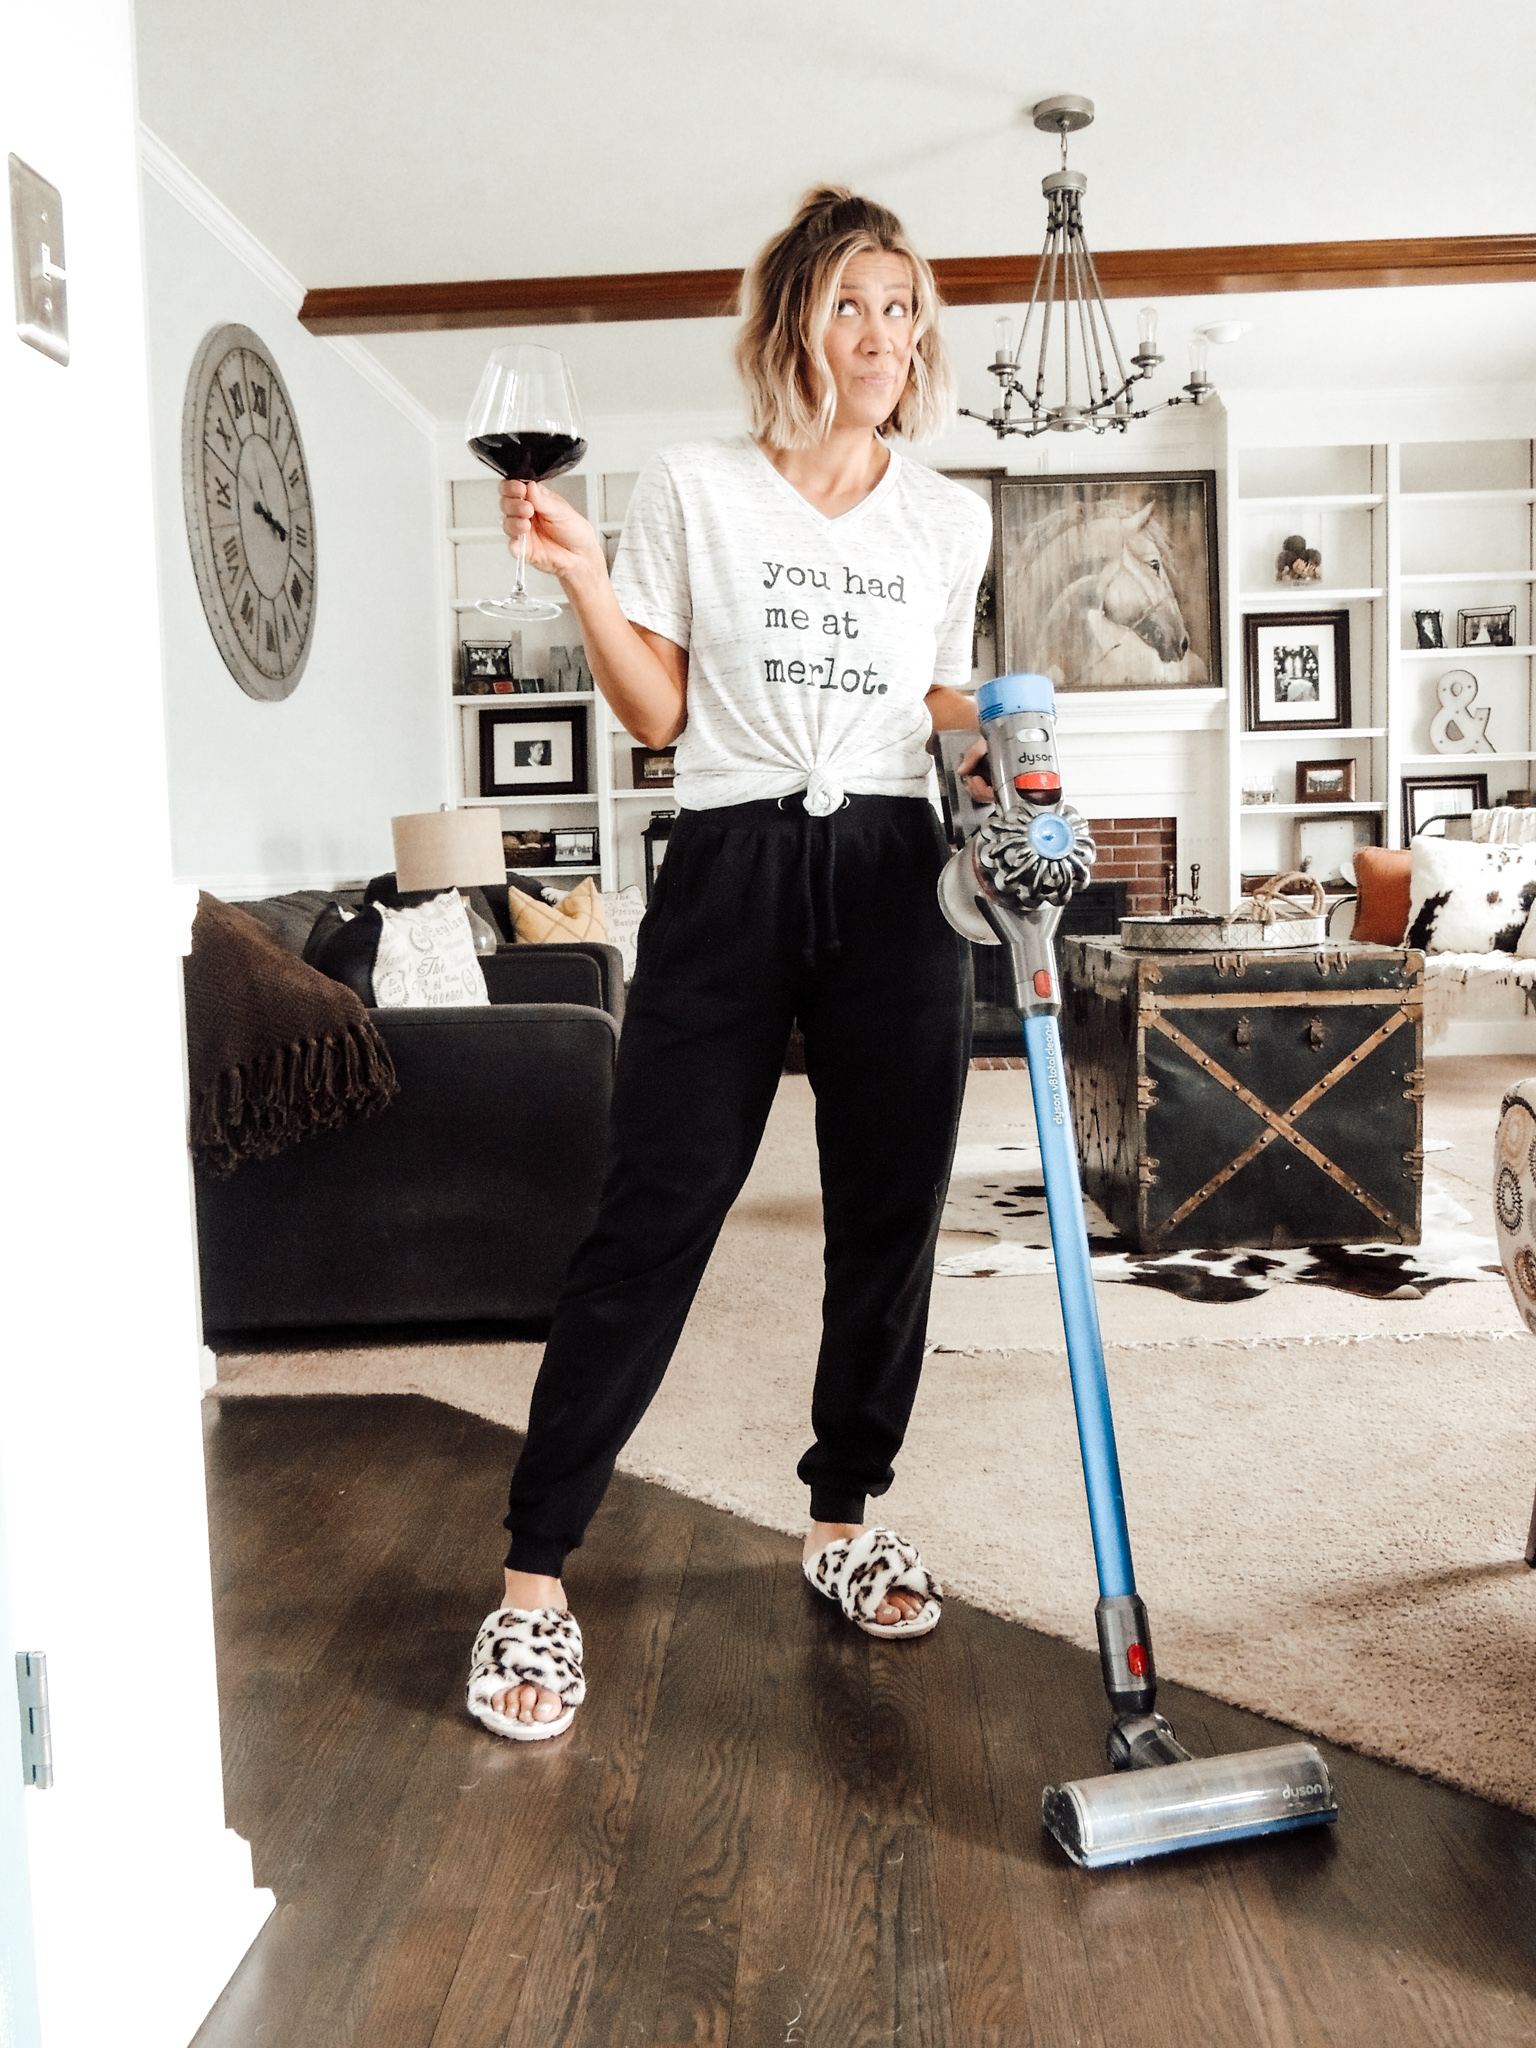 Spring Cleaning Top Rated Vacuums Above The L.A.W. Style